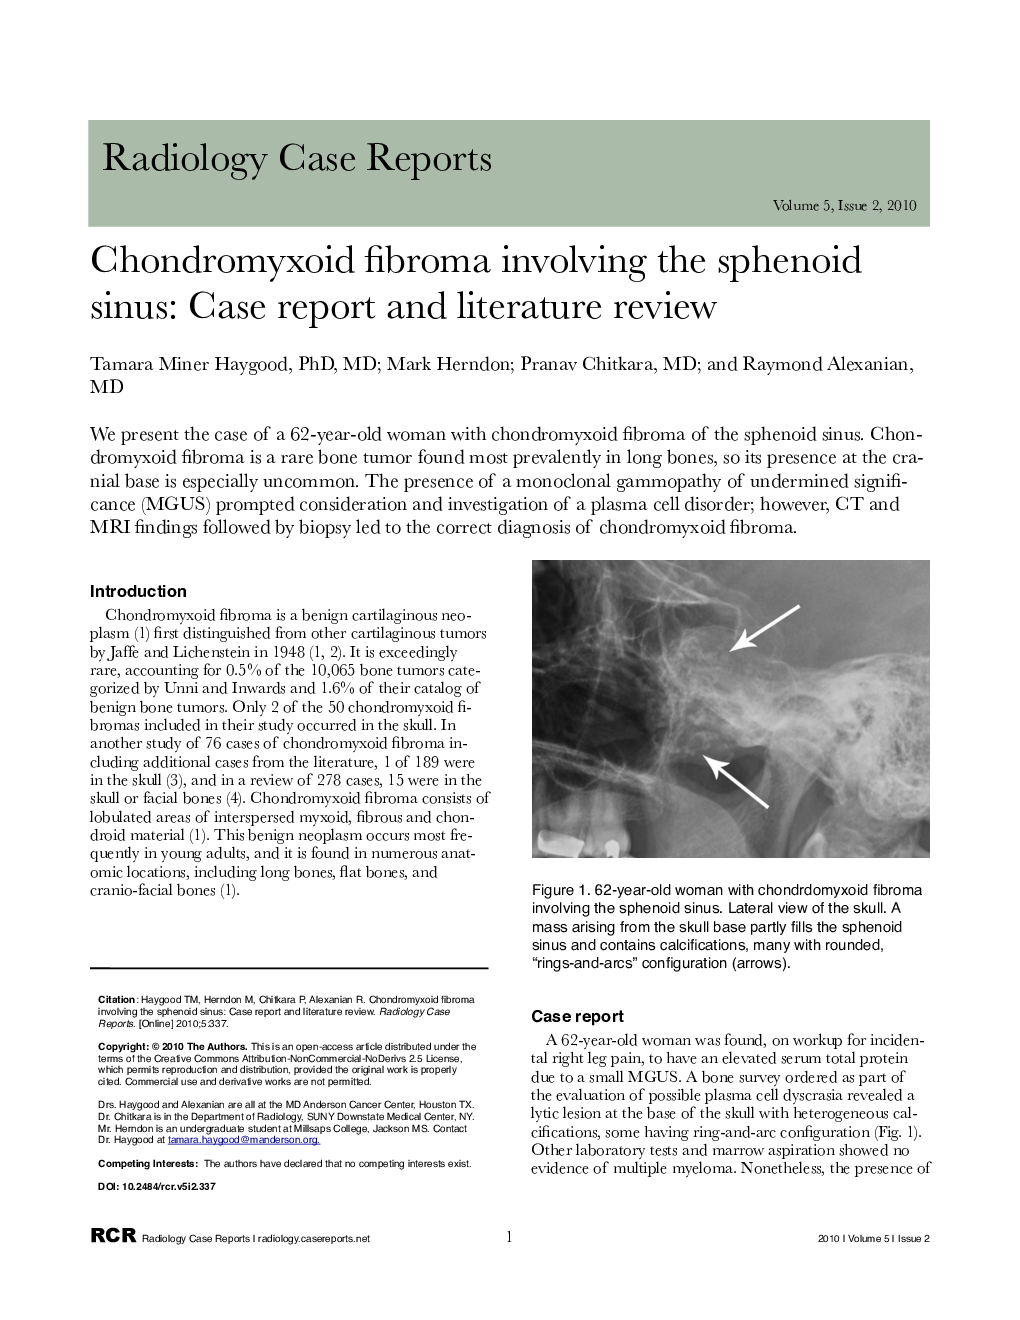 Chondromyxoid fibroma involving the sphenoid sinus: Case report and literature review